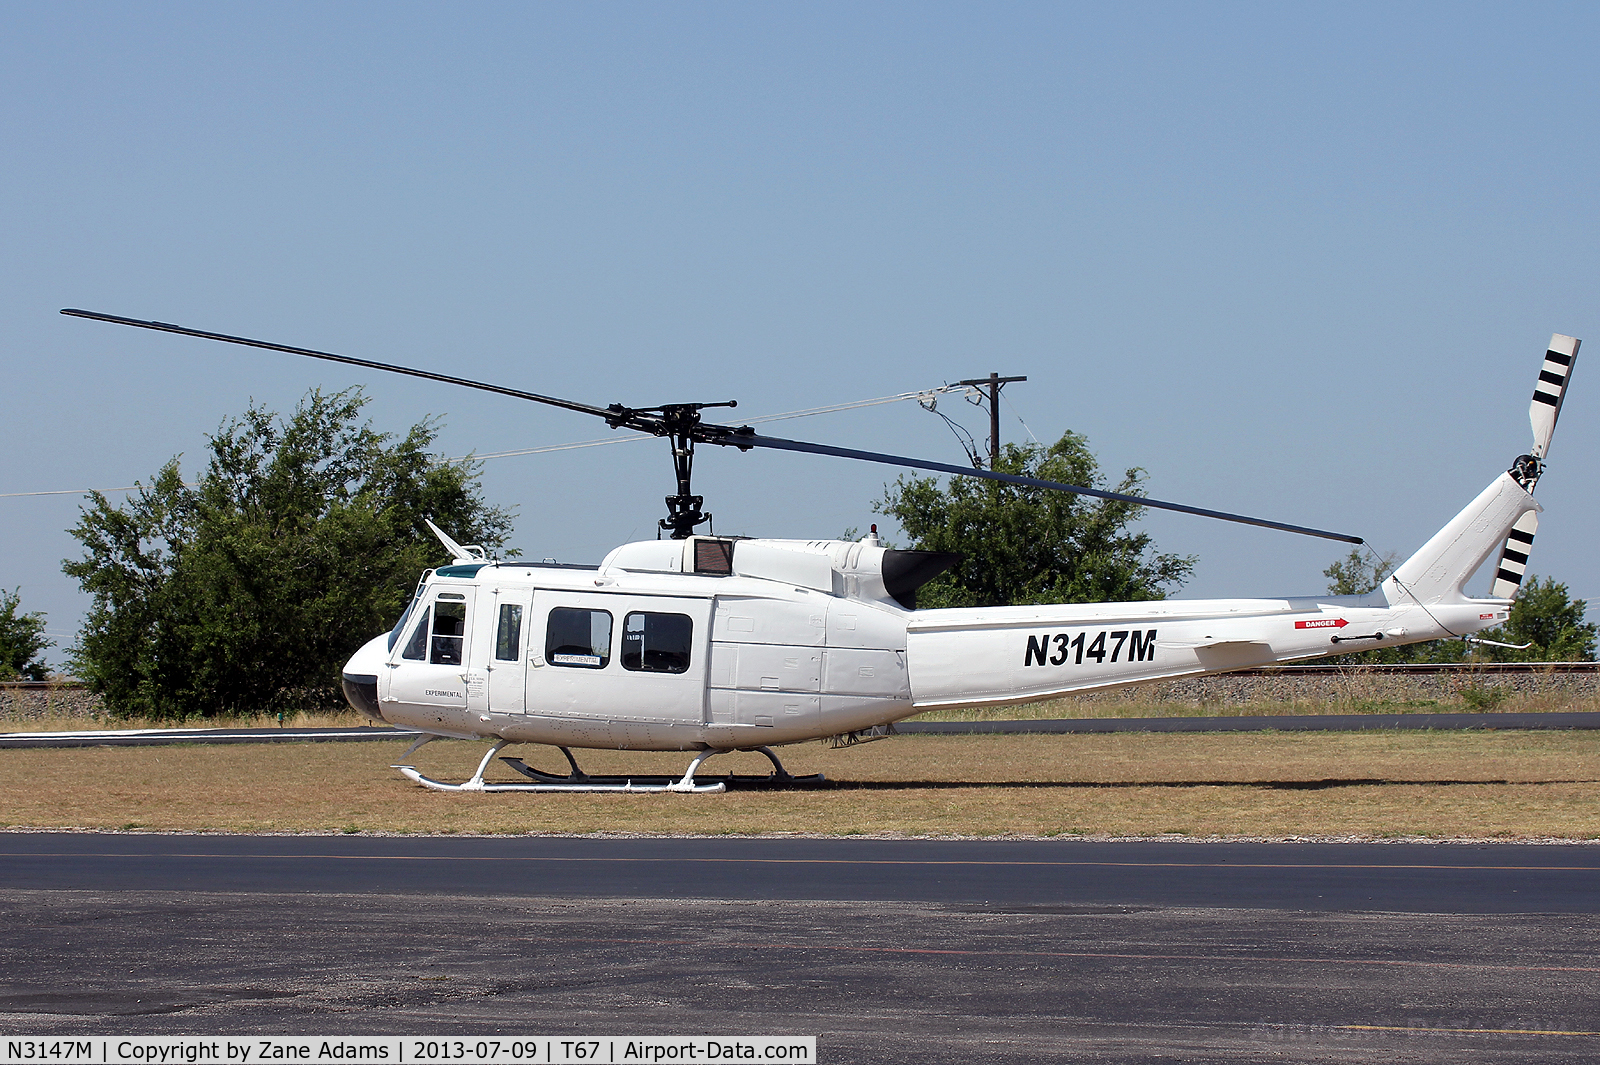 N3147M, 1964 Bell UH-1H Iroquois C/N 4204, At Hicks Field - Fort Worth, TX